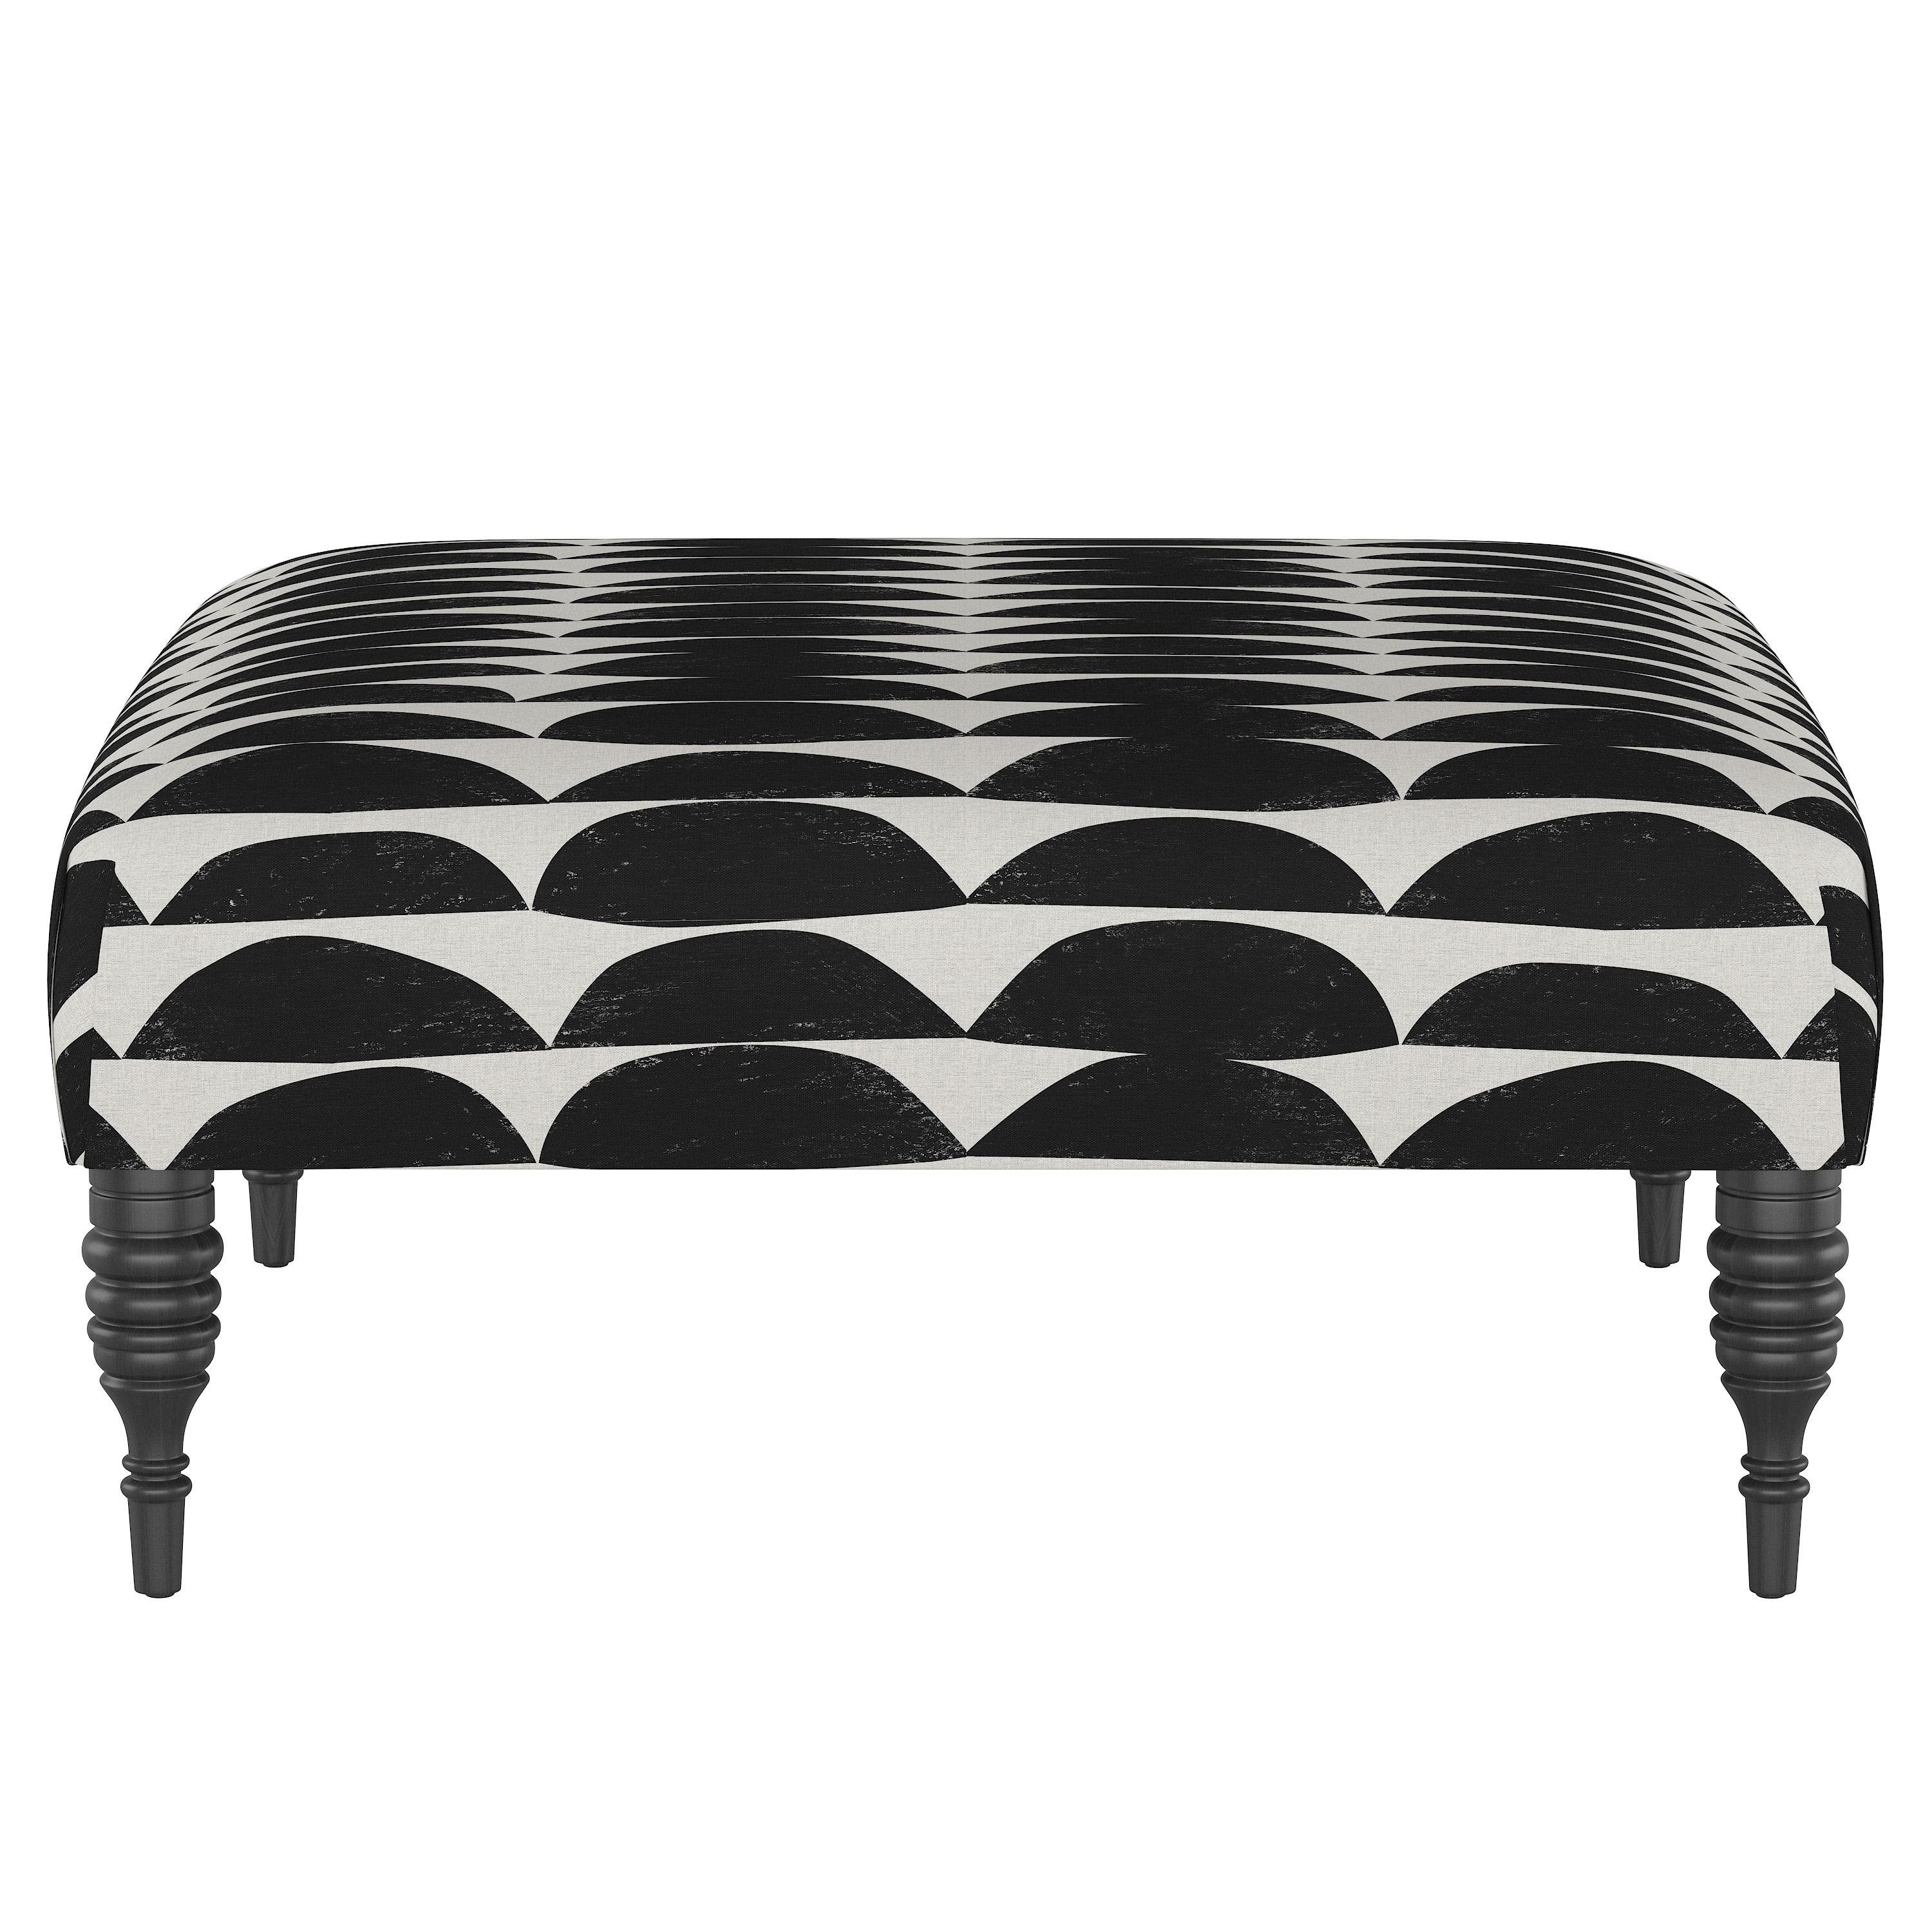 Algren Cocktail Ottoman with Turned Legs - Image 1